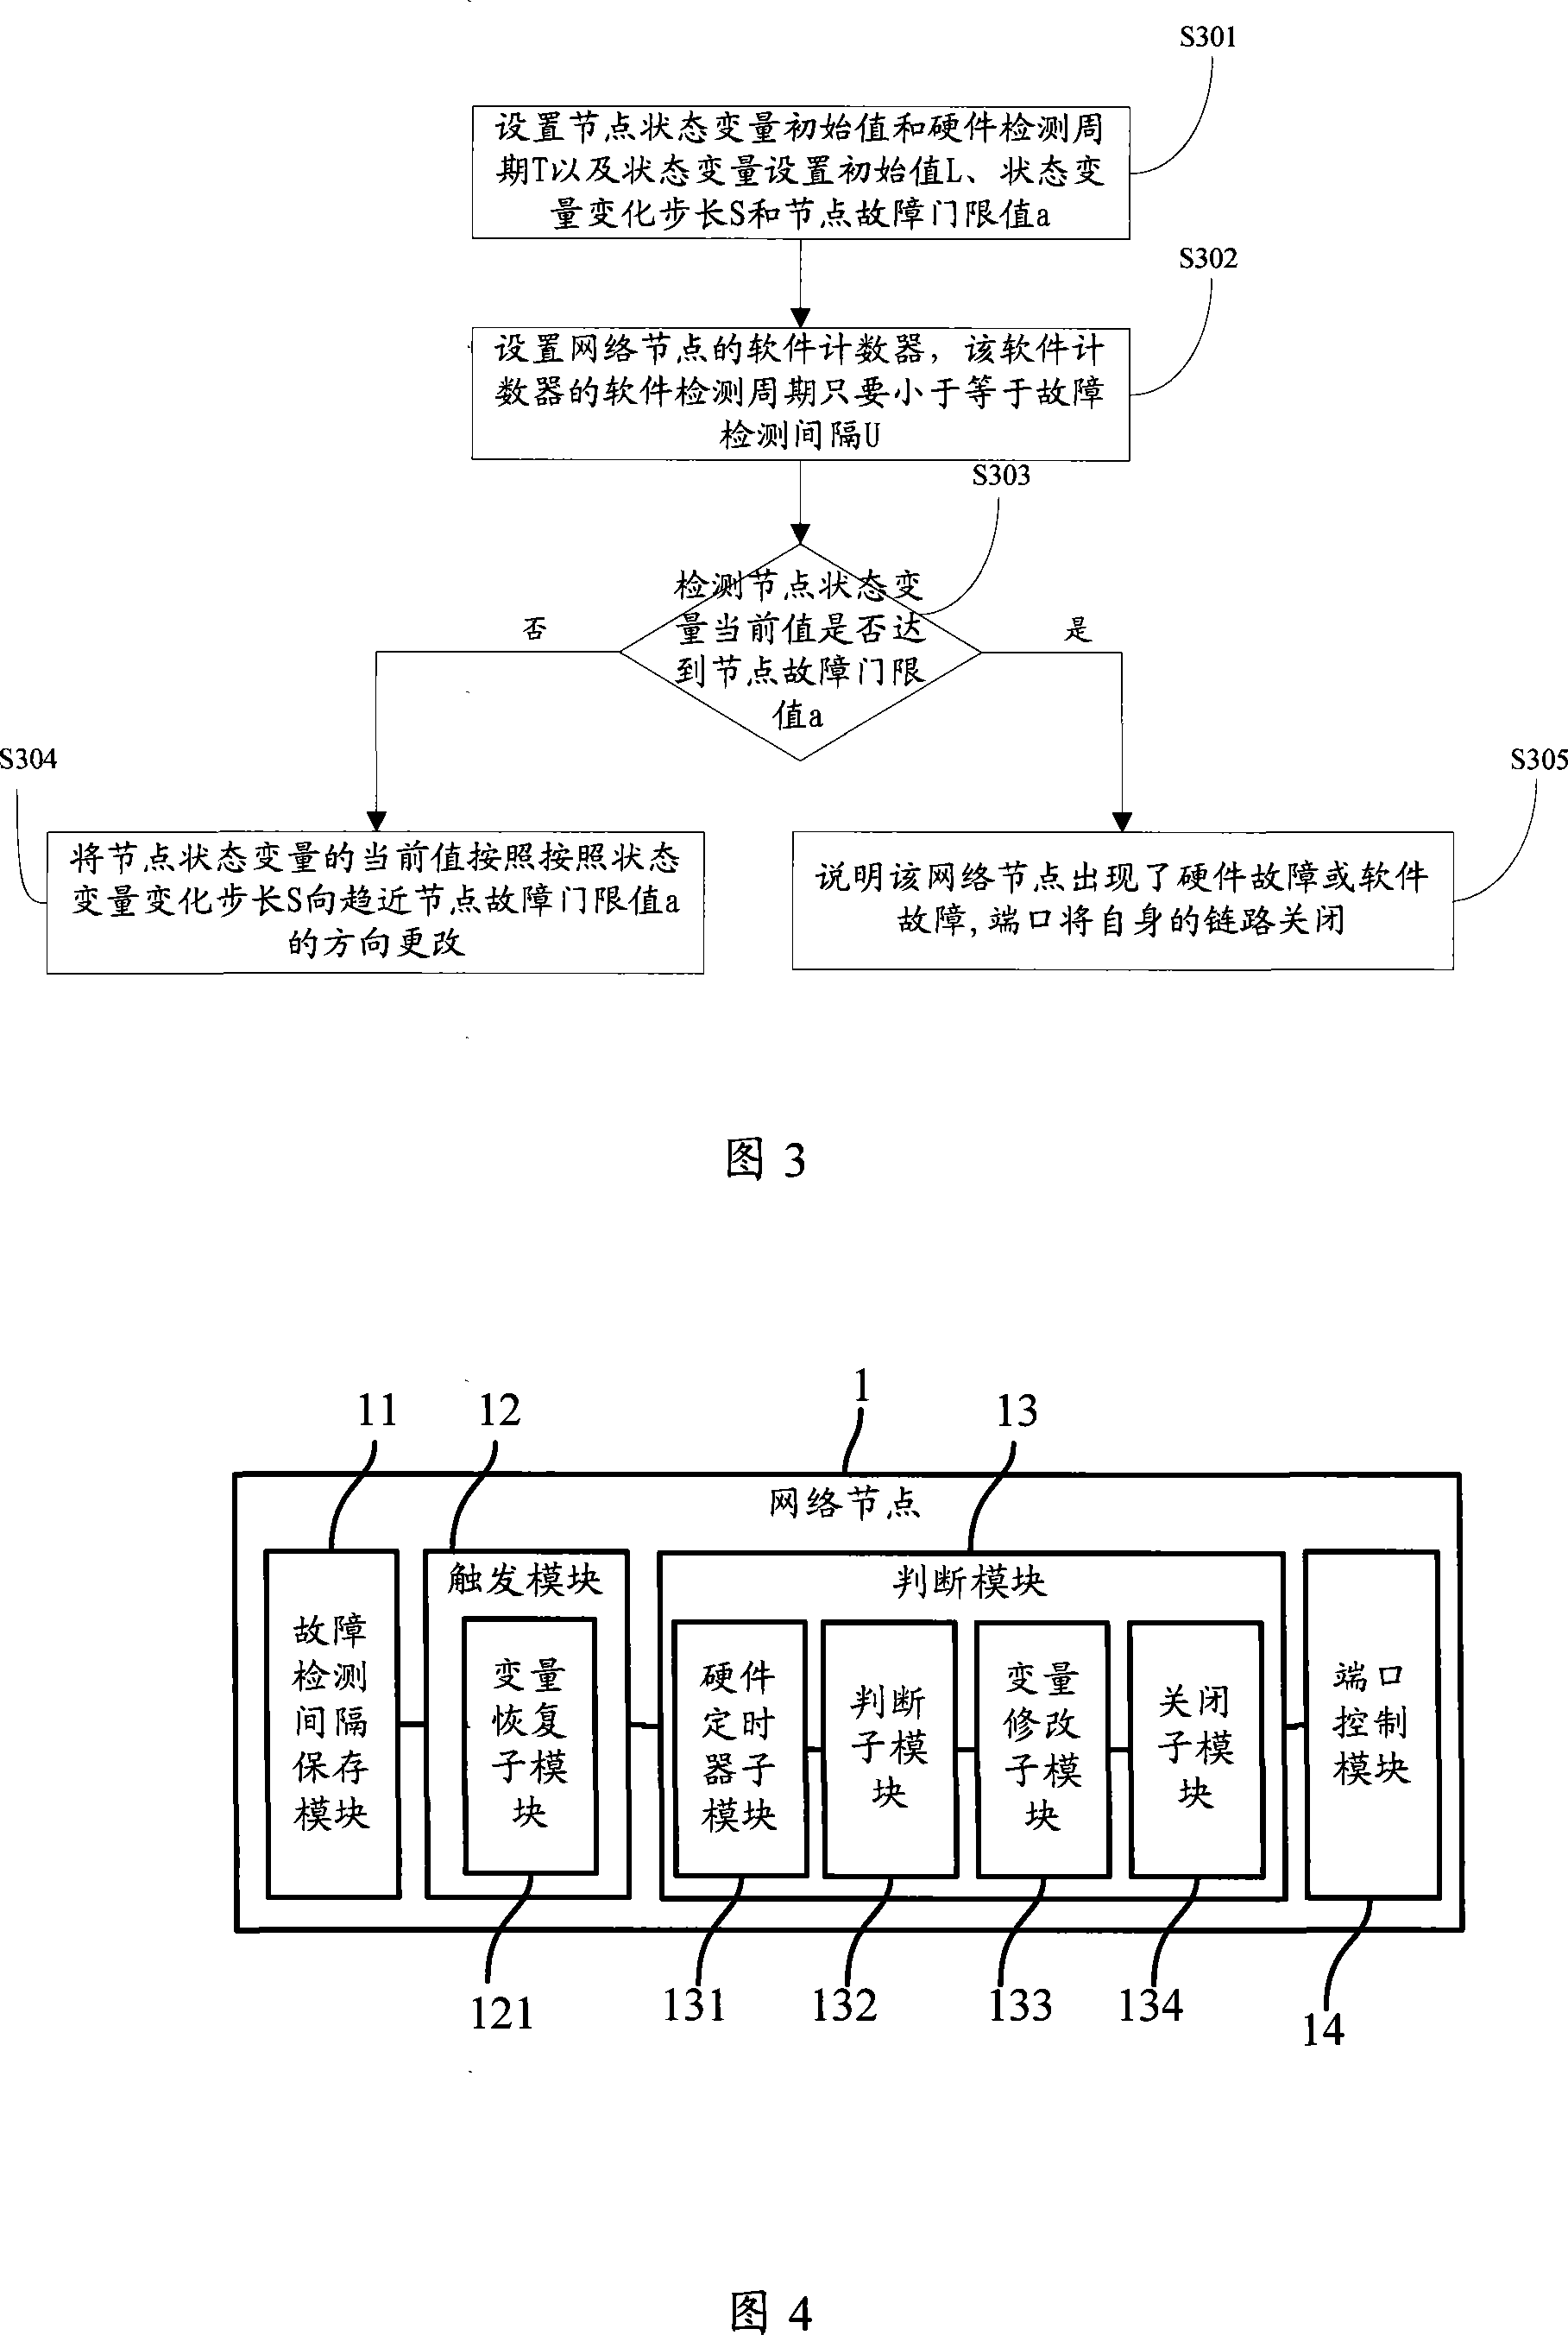 Network node detection method and apparatus